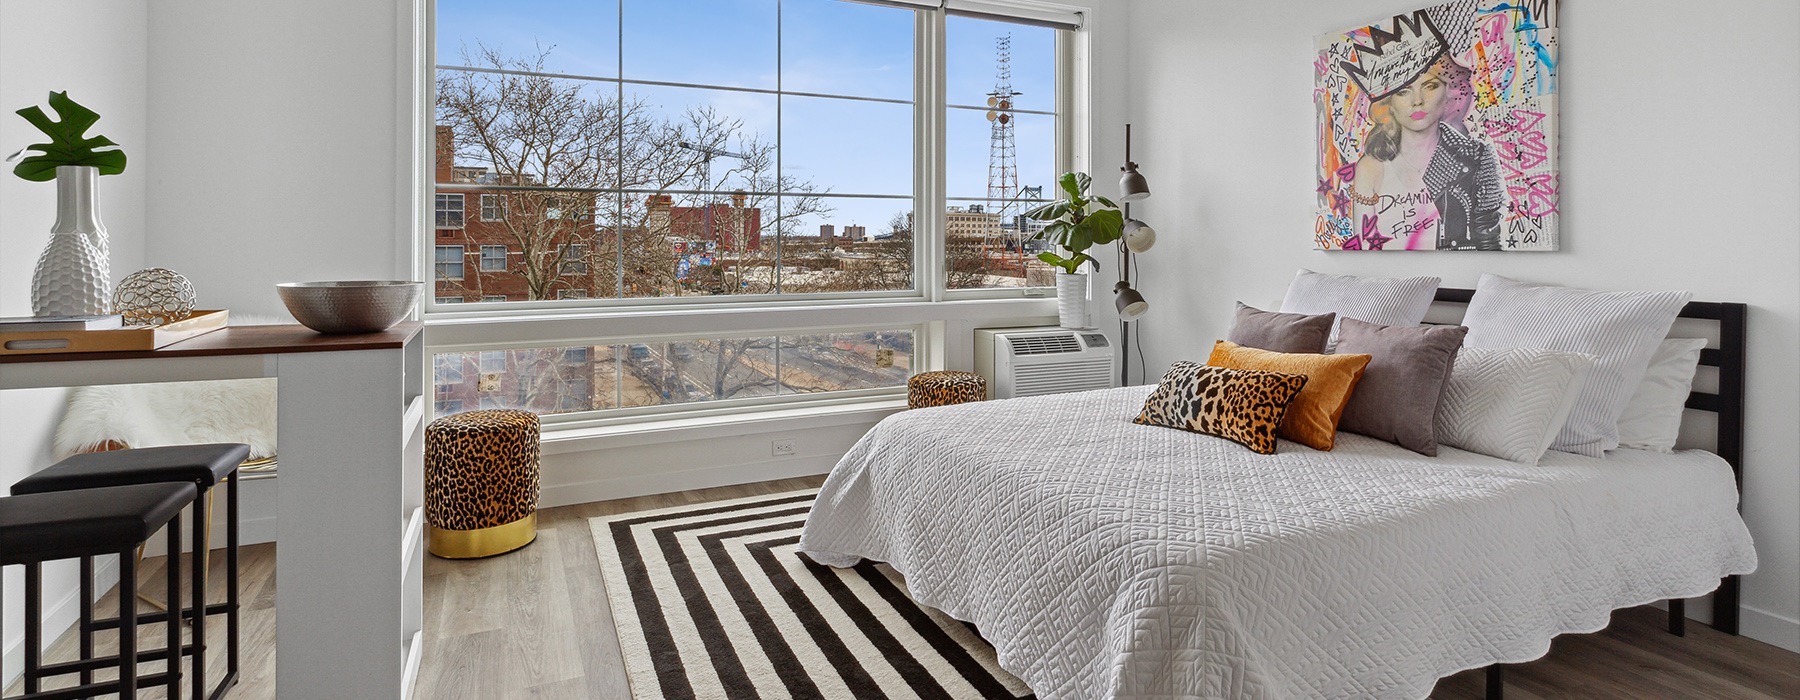 Spacious bedroom with popart and a great view